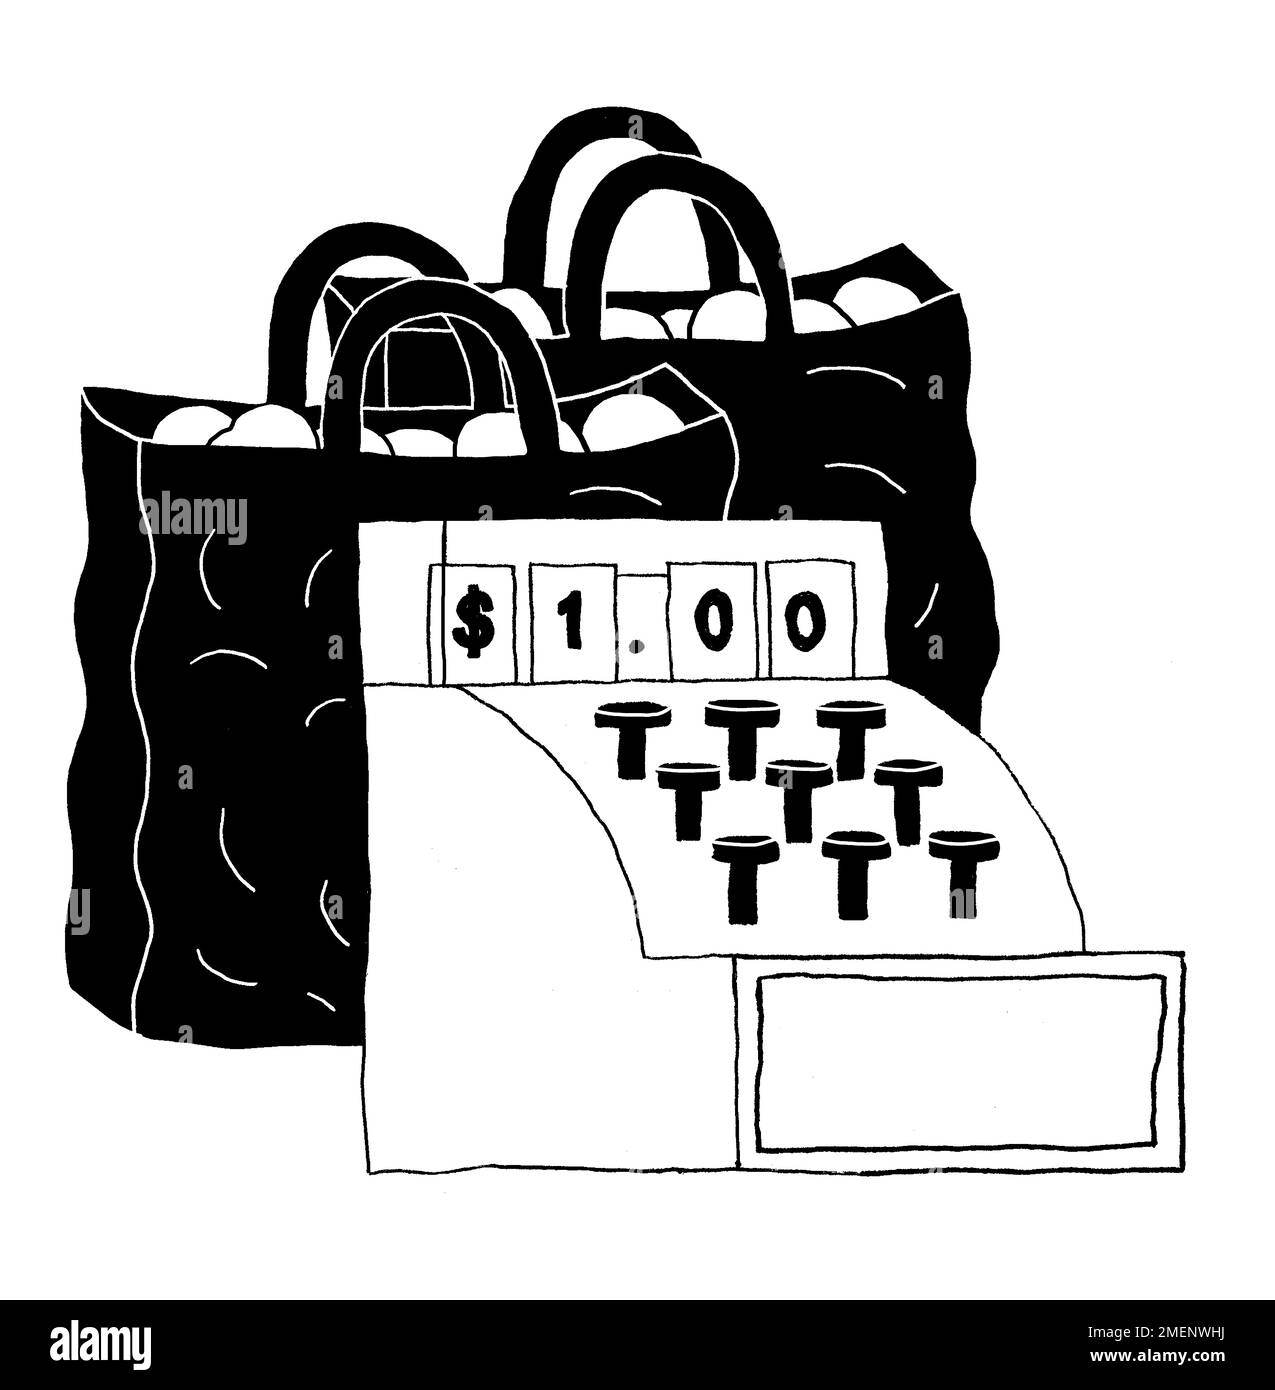 Black and white illustration of till displaying one dollar sign with shopping bags Stock Photo